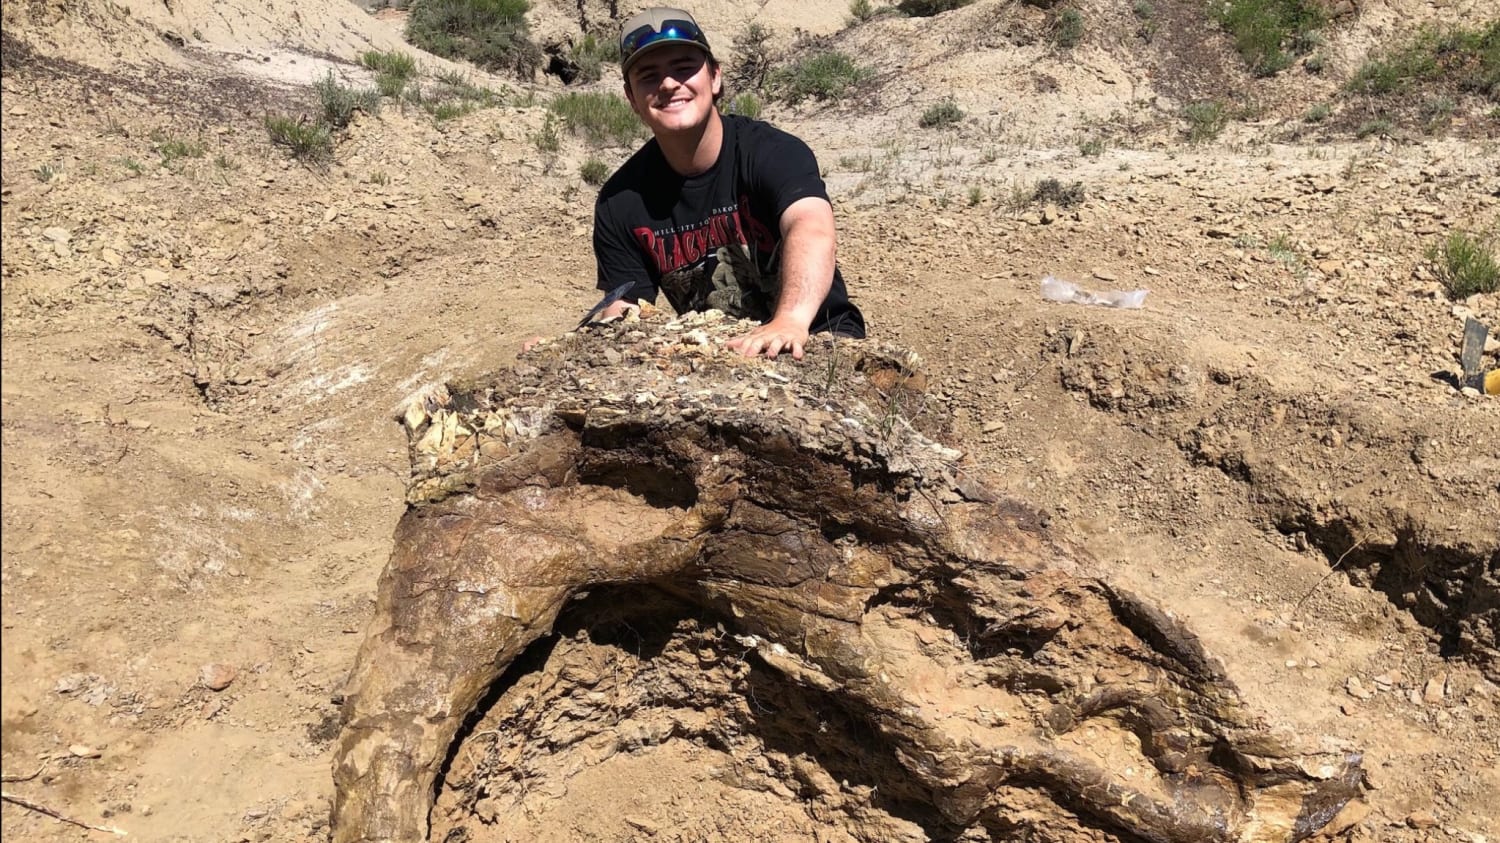 College Student Finds a 65-Million-Year-Old Triceratops Skull During Paleontology Dig in North Dakota